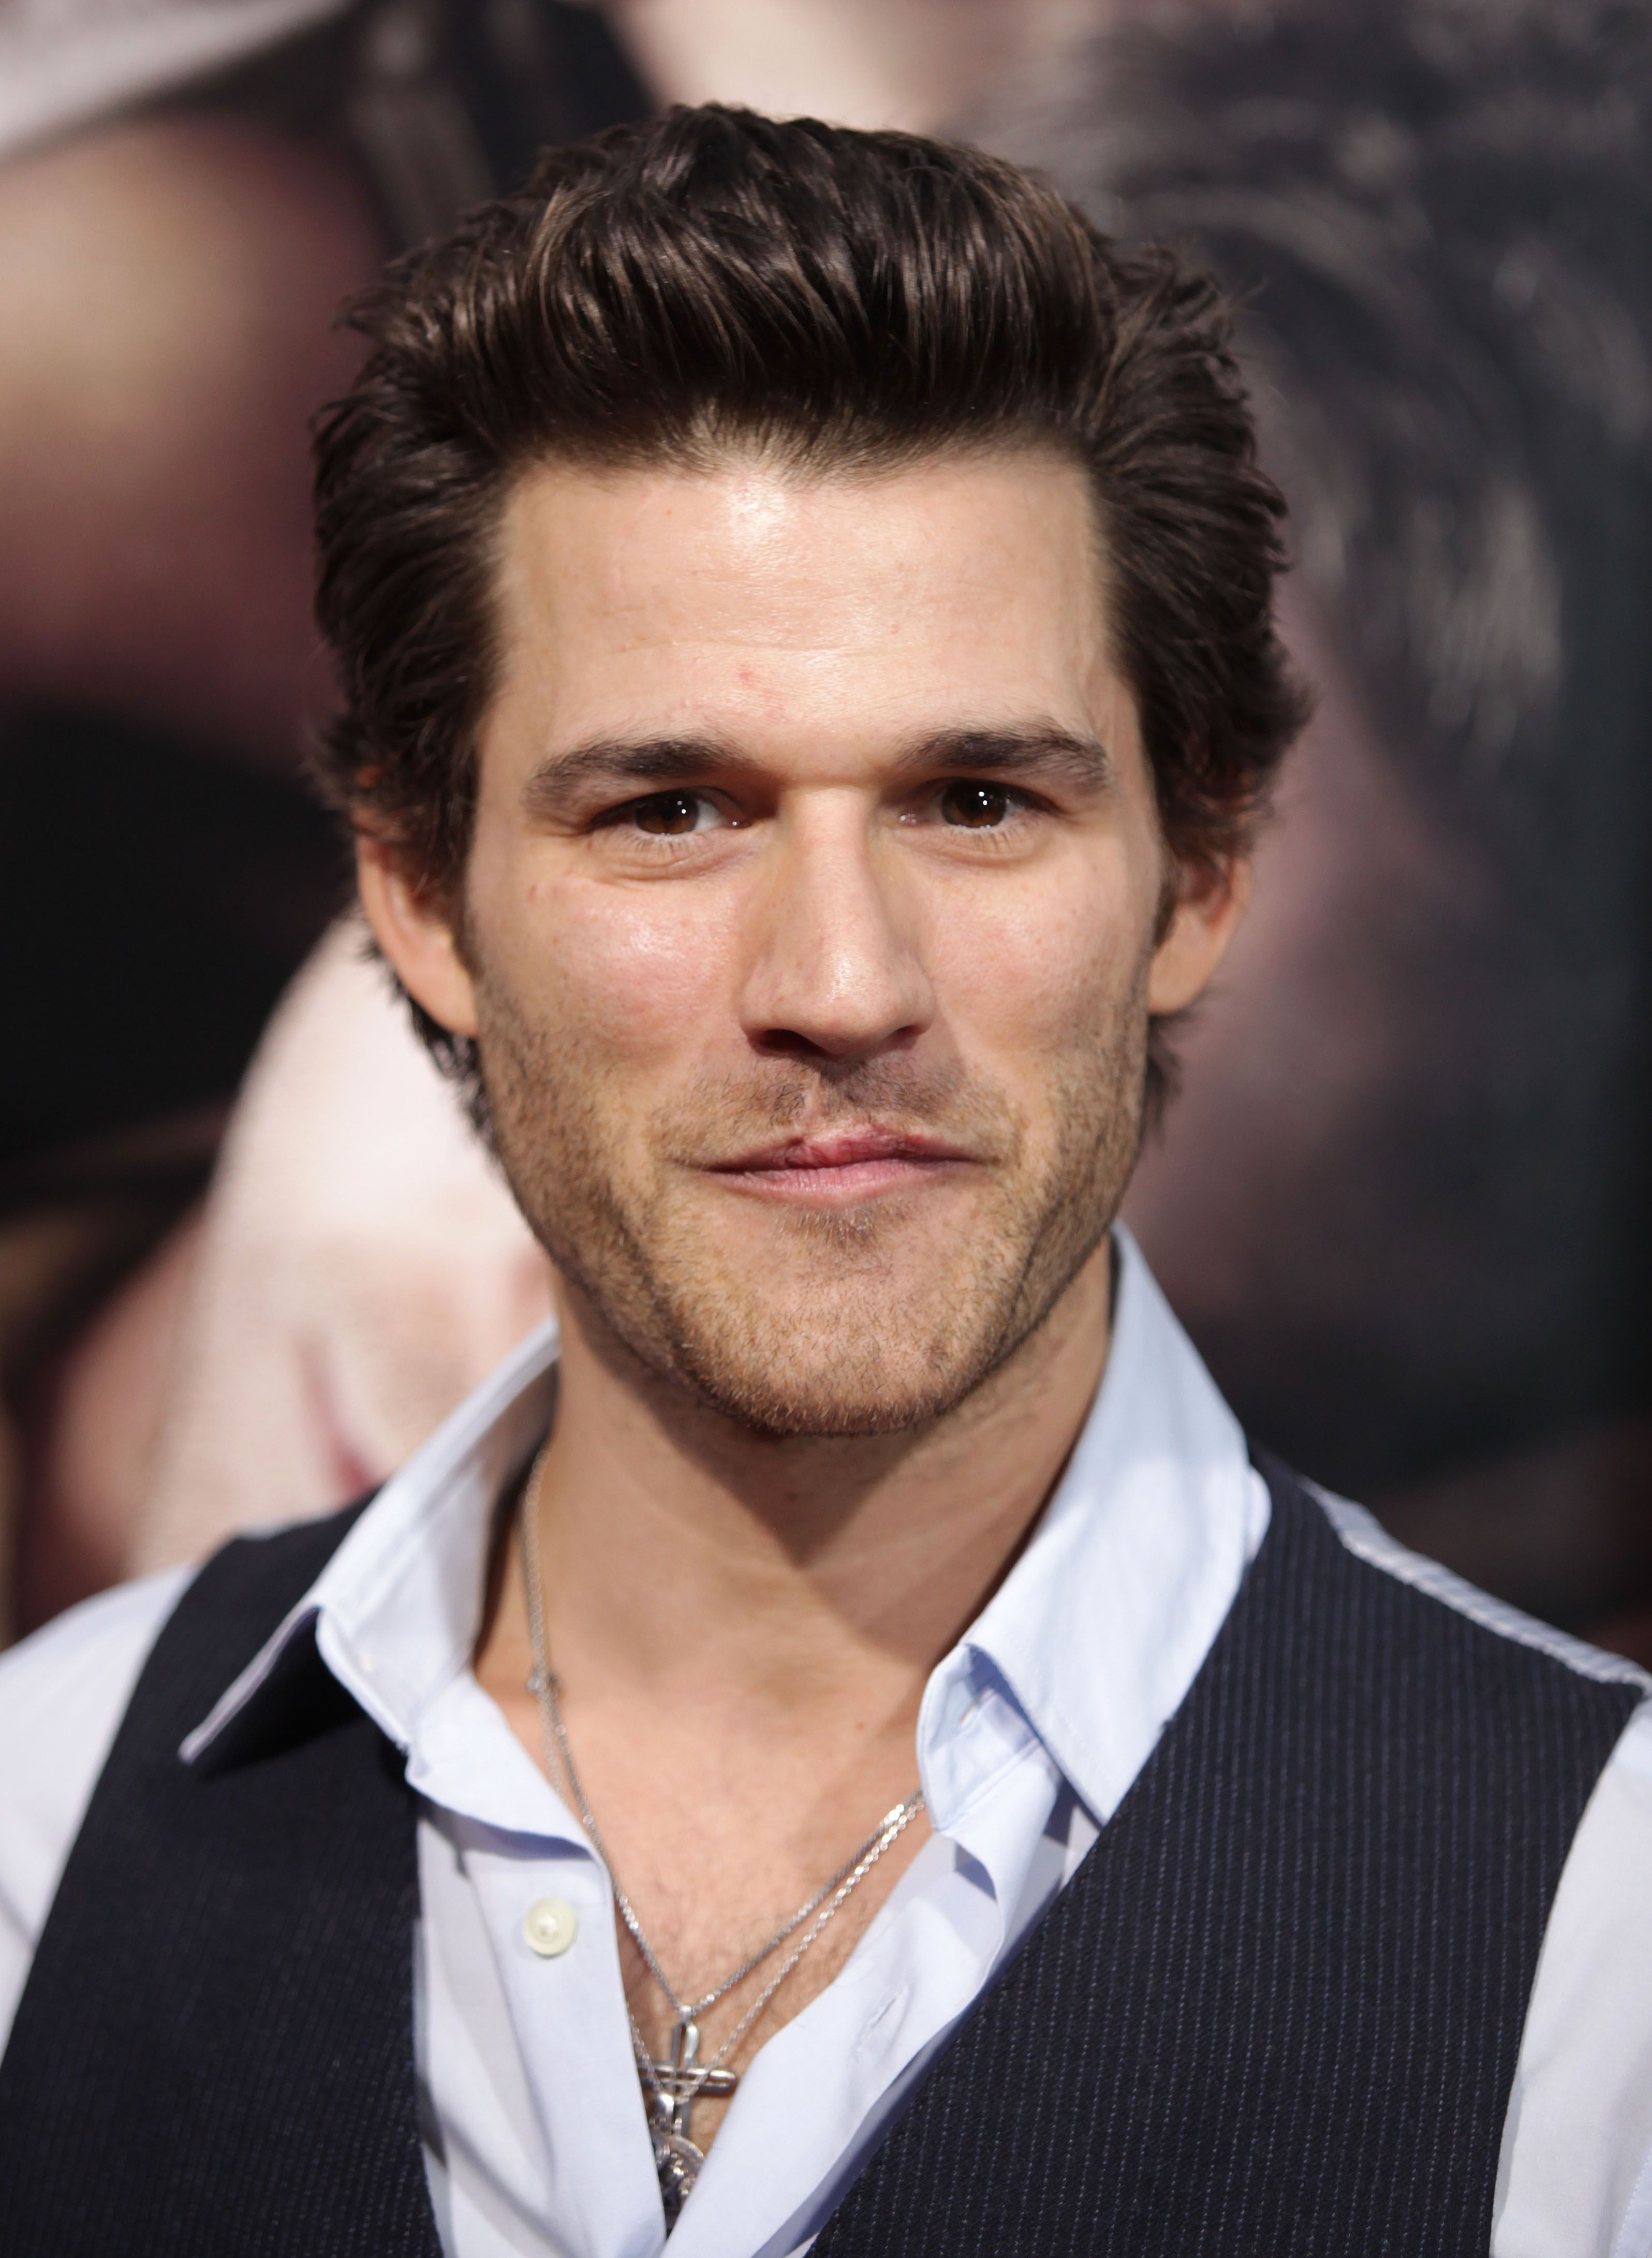 How tall is Johnny Whitworth?